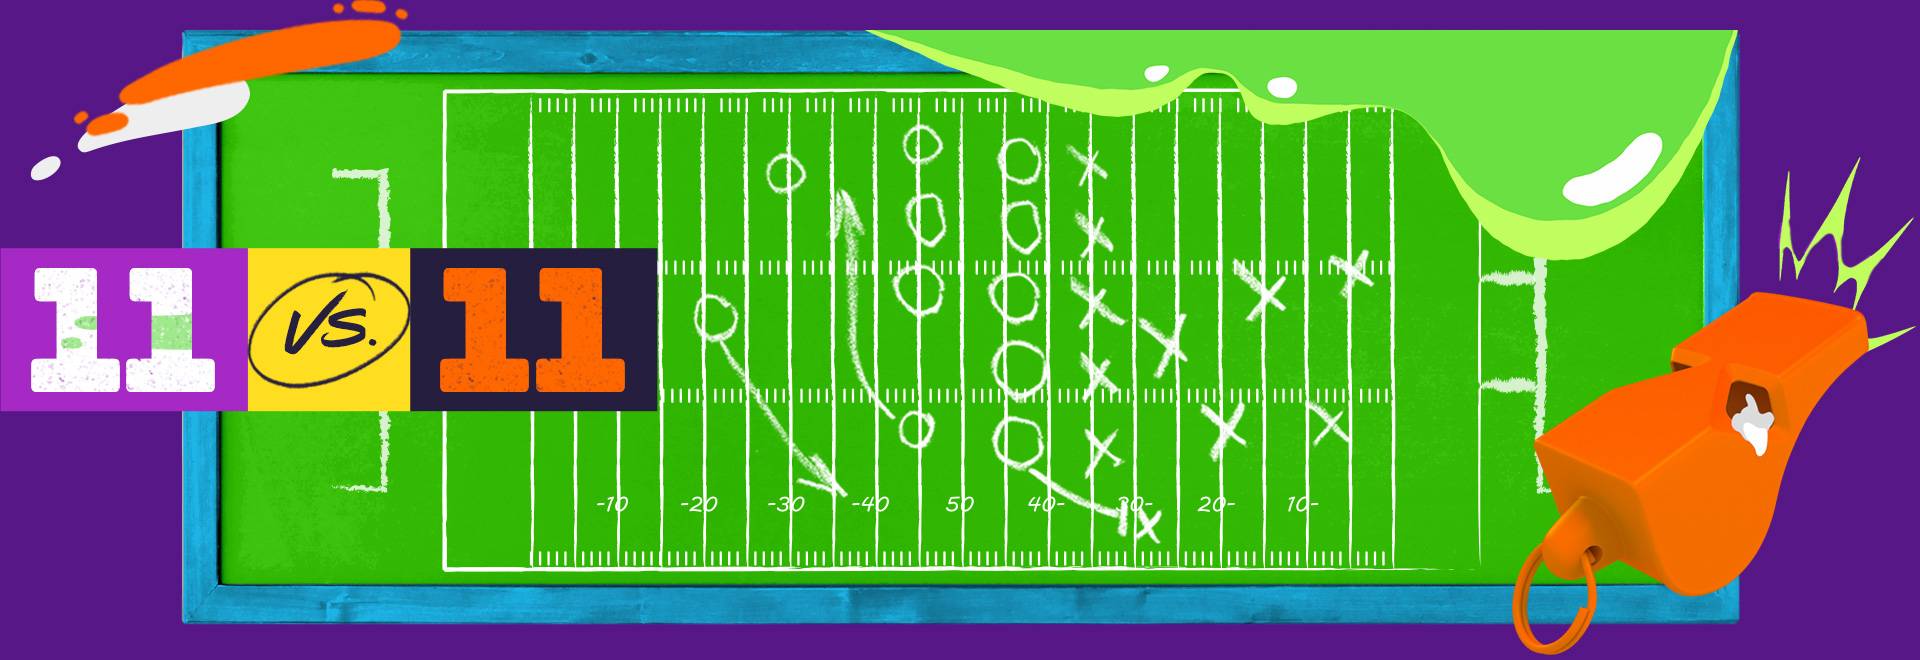 Football gridiron graphic as seen from above with an X's and O's football play drawn up. The numbers 'eleven vs. eleven' are also drawn on, along with slime and a whistle.